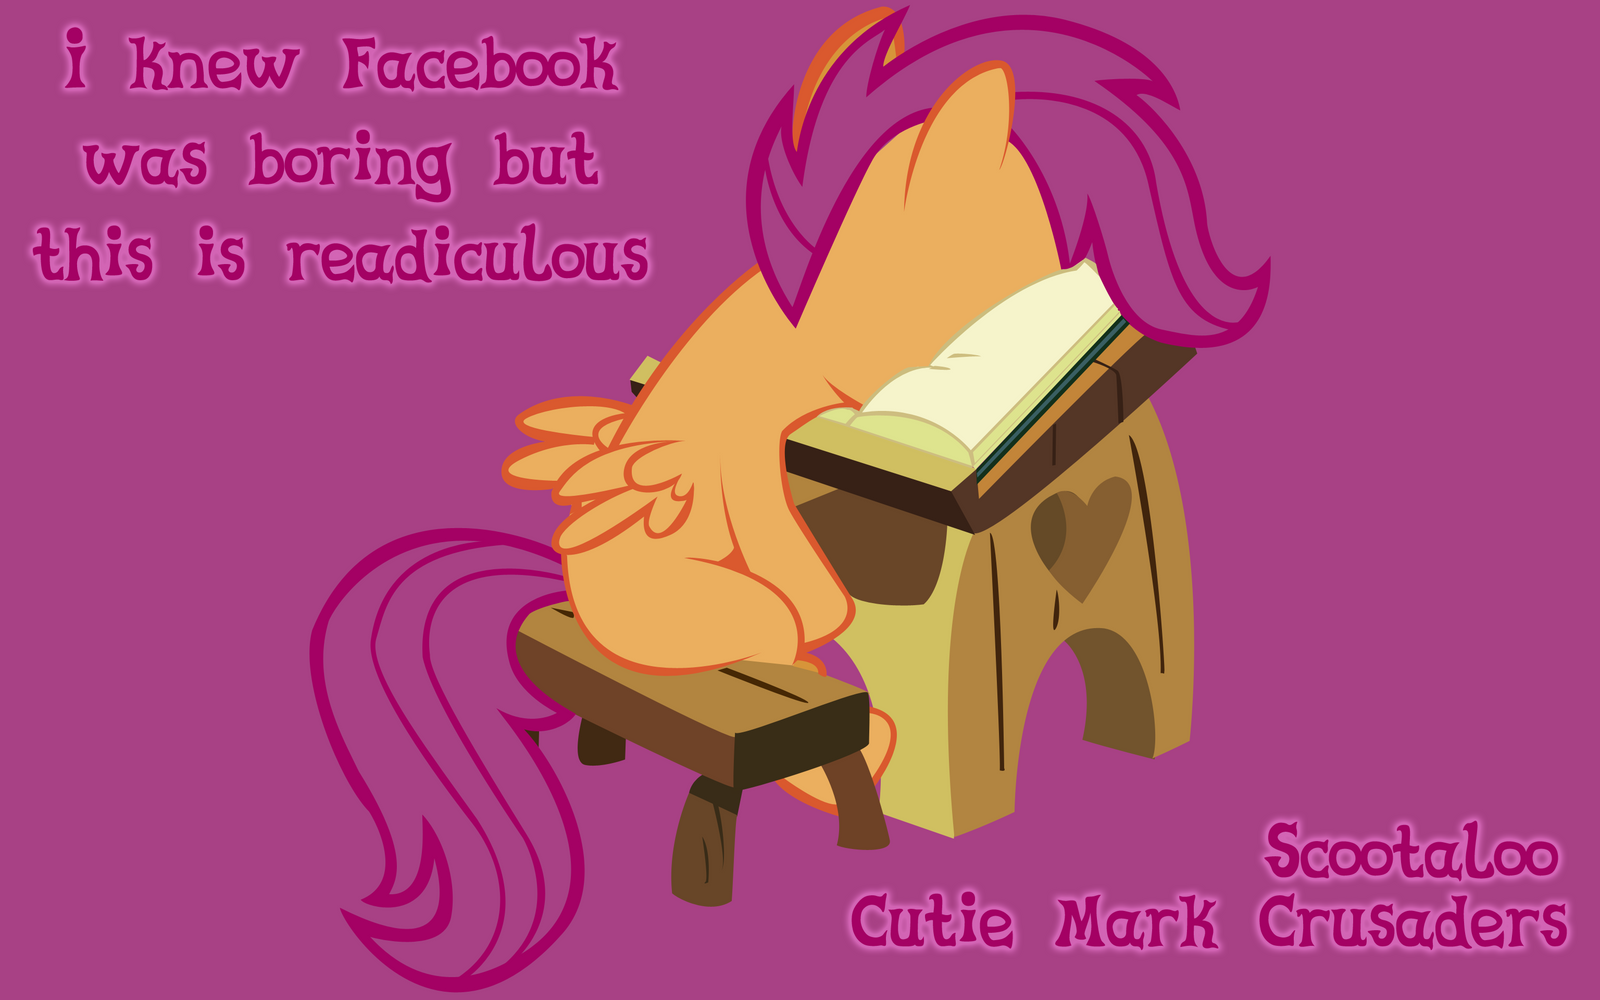 [Bild: scootaloo__s_thoughts_on_facebook_by_laz...52nv6h.png]